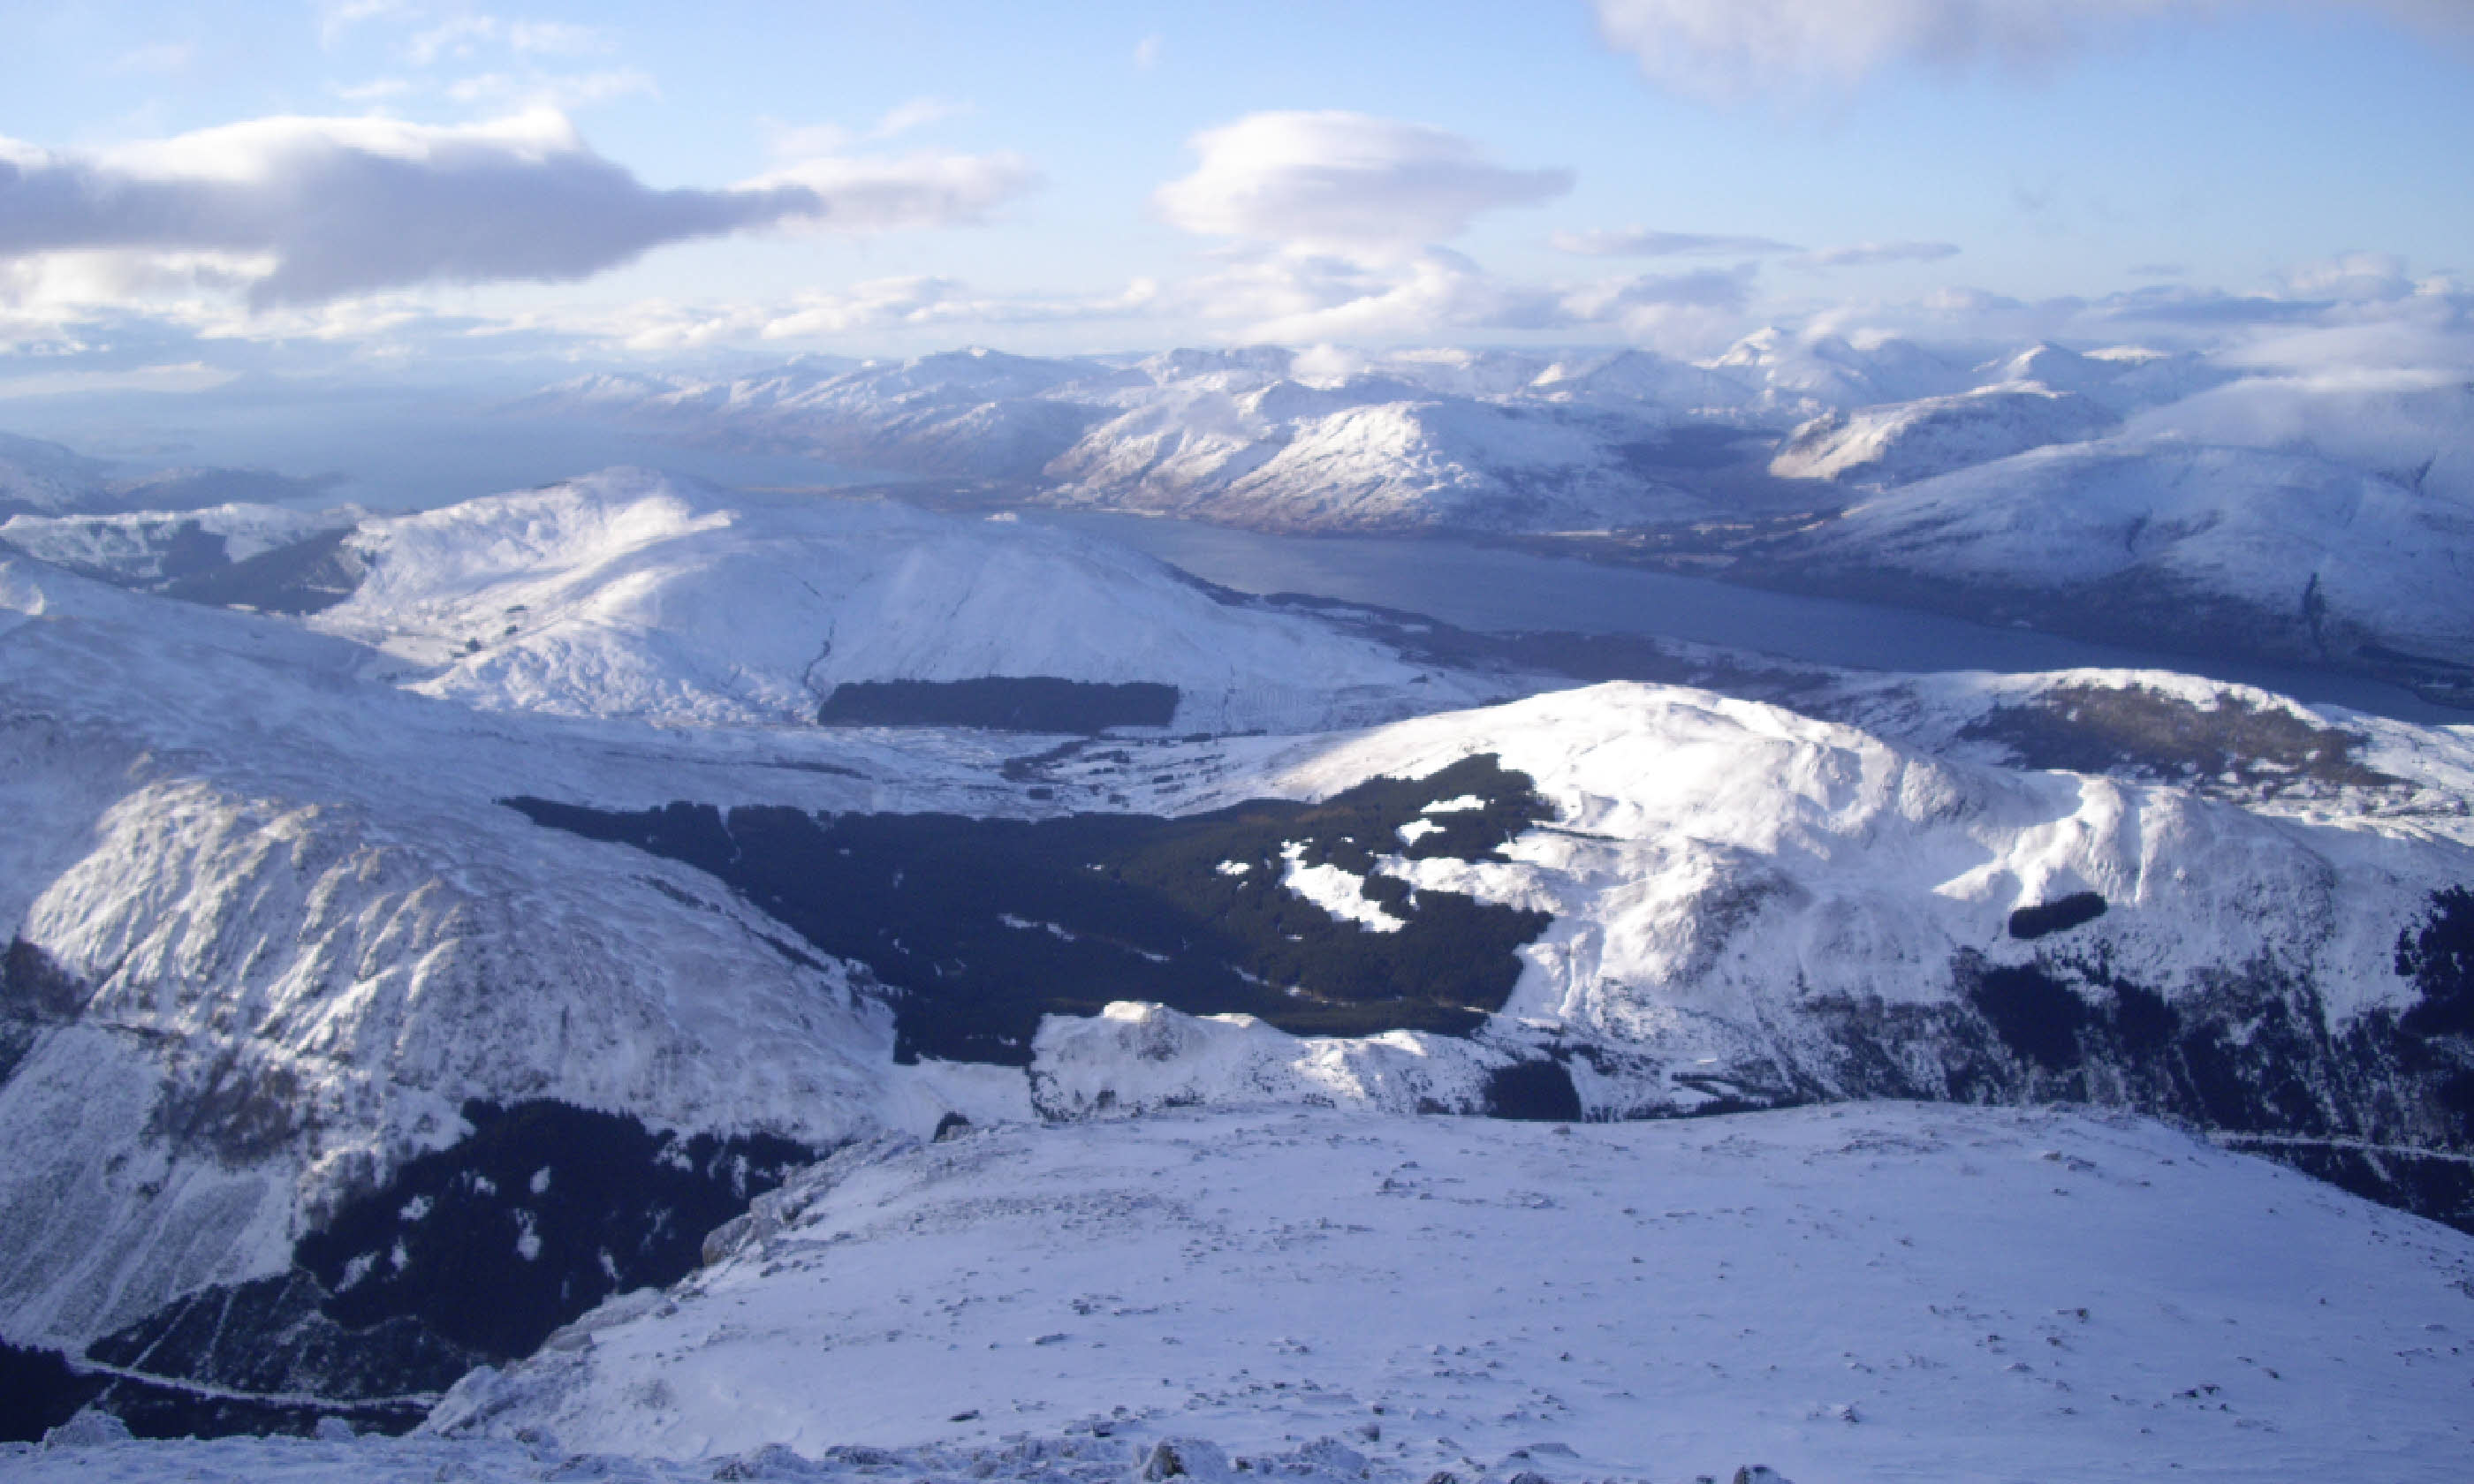 The view from Ben Nevis (Alex Kendall)